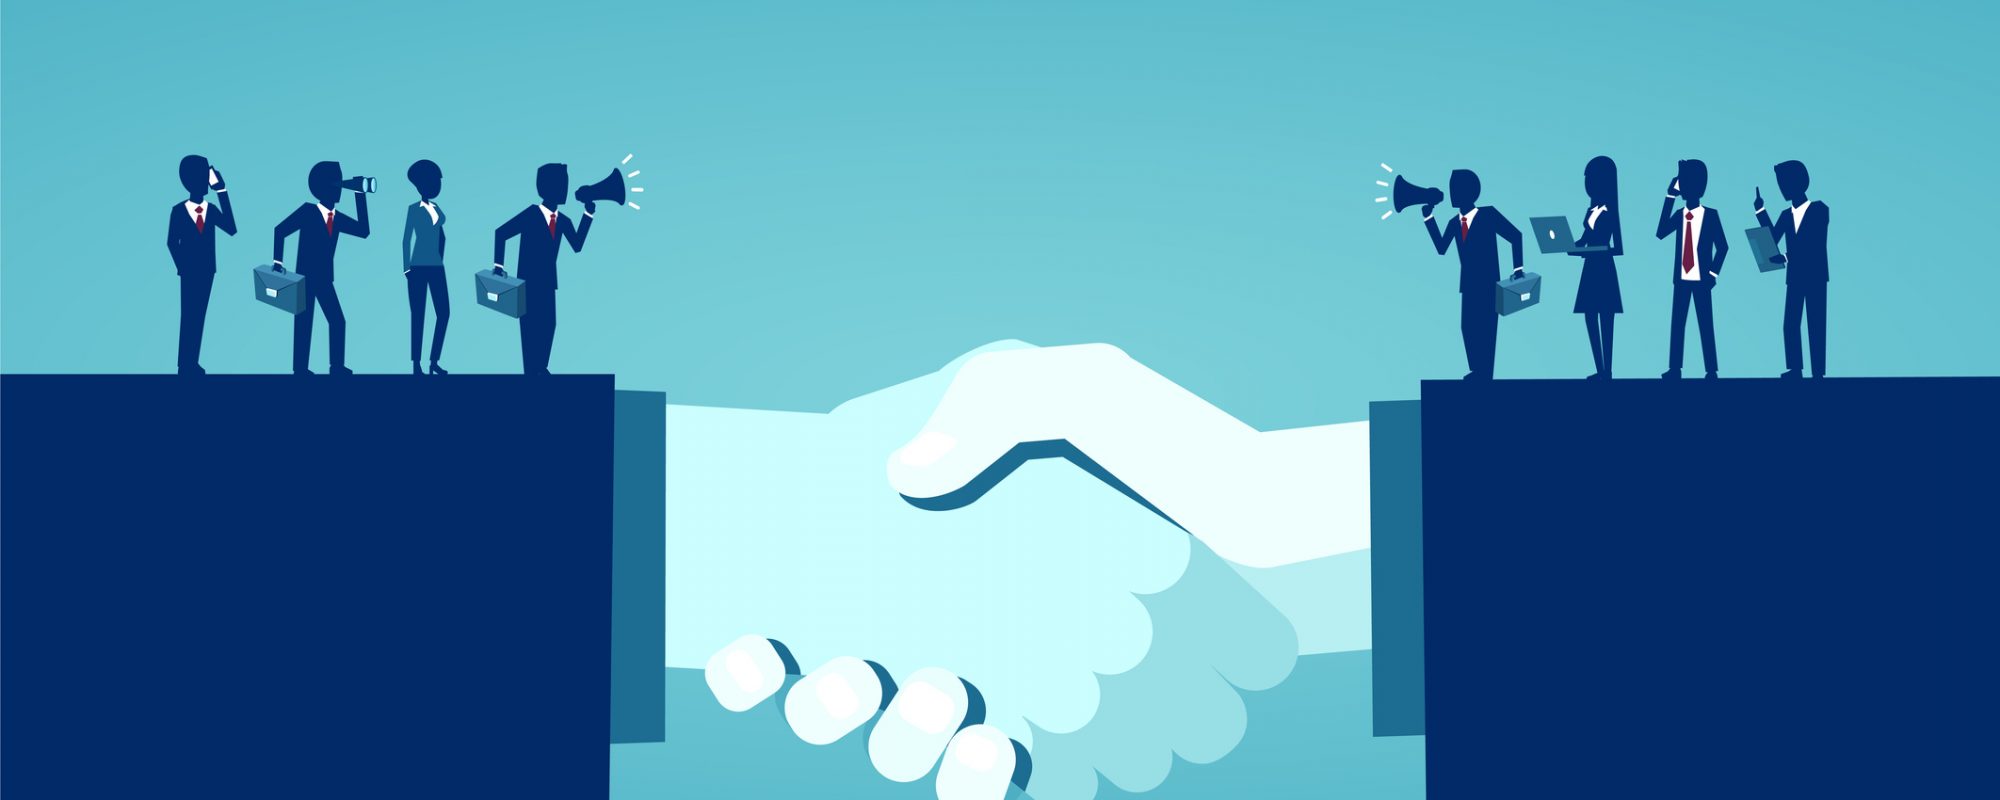 Businesss collaborations concept. Vector of businesspeople reaching an agreement after successful negotiations